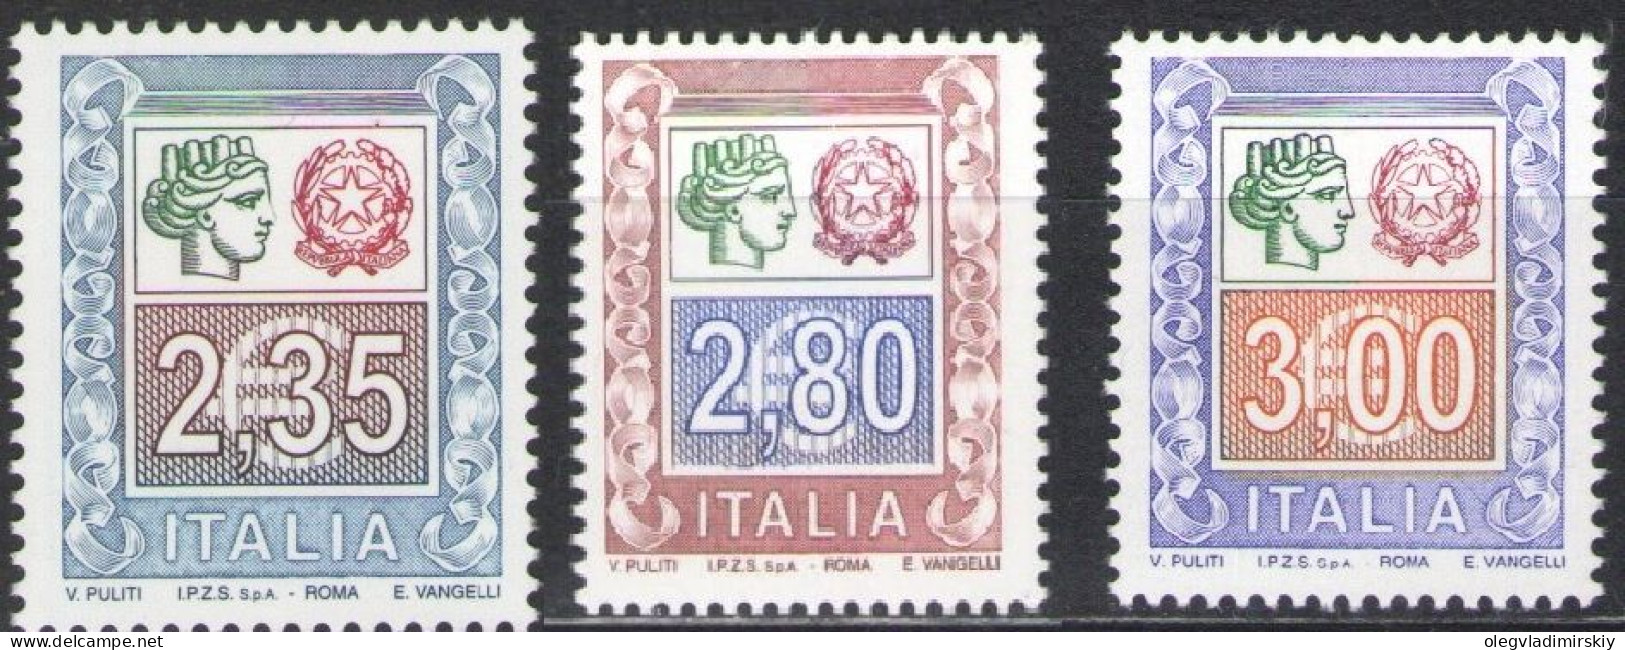 Italy Italia 2004 Definitives High Face Value Set Of 3 Stamps MNH - 2001-10: Mint/hinged